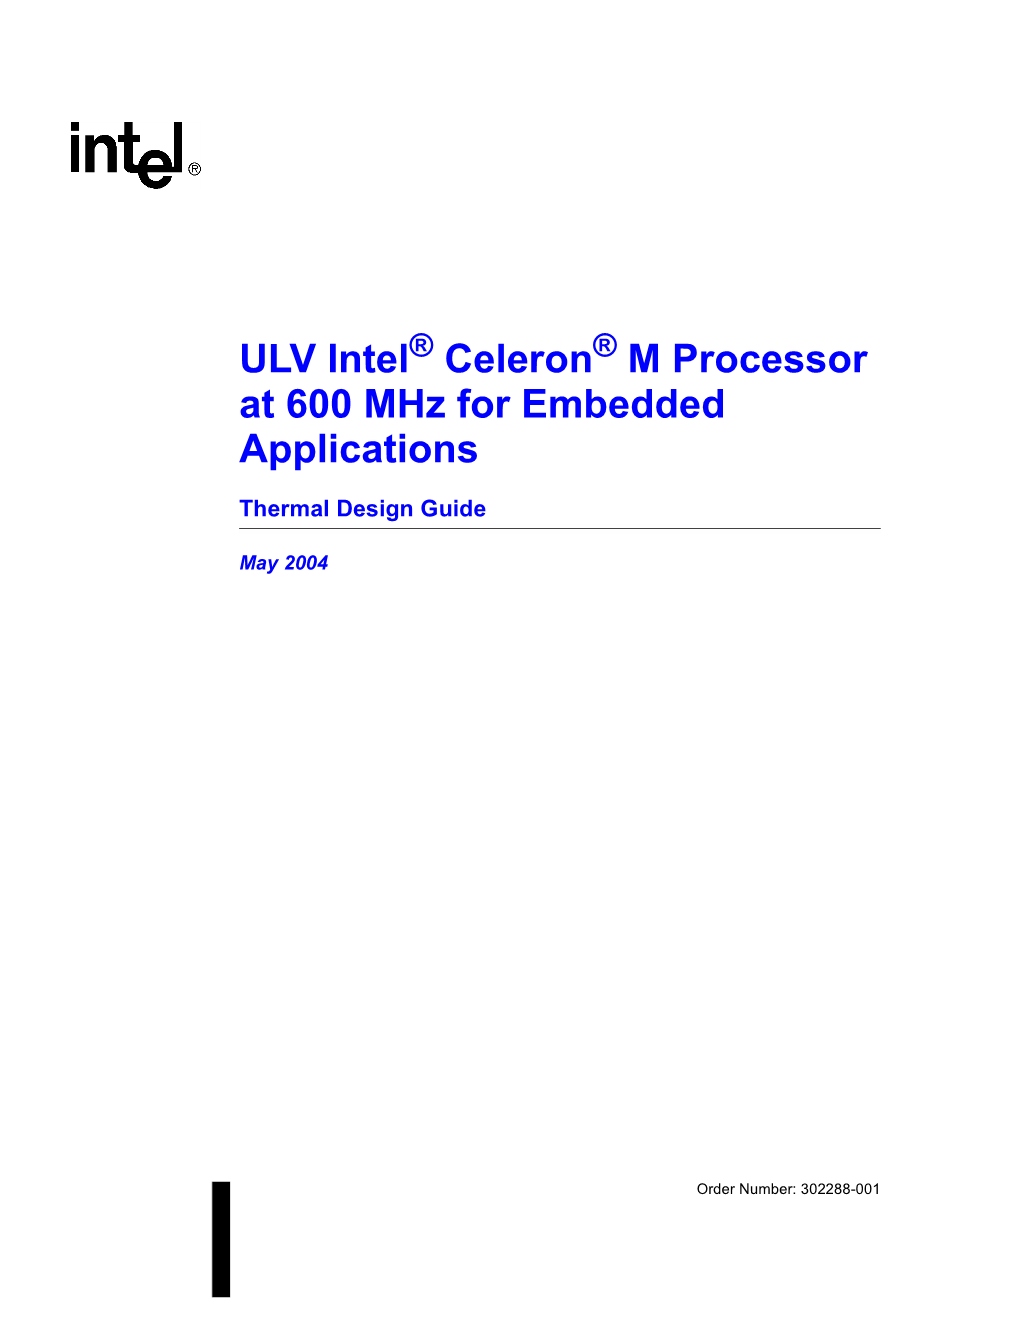 ULV Intel® Celeron® M Processor at 600 Mhz for Embedded Applications